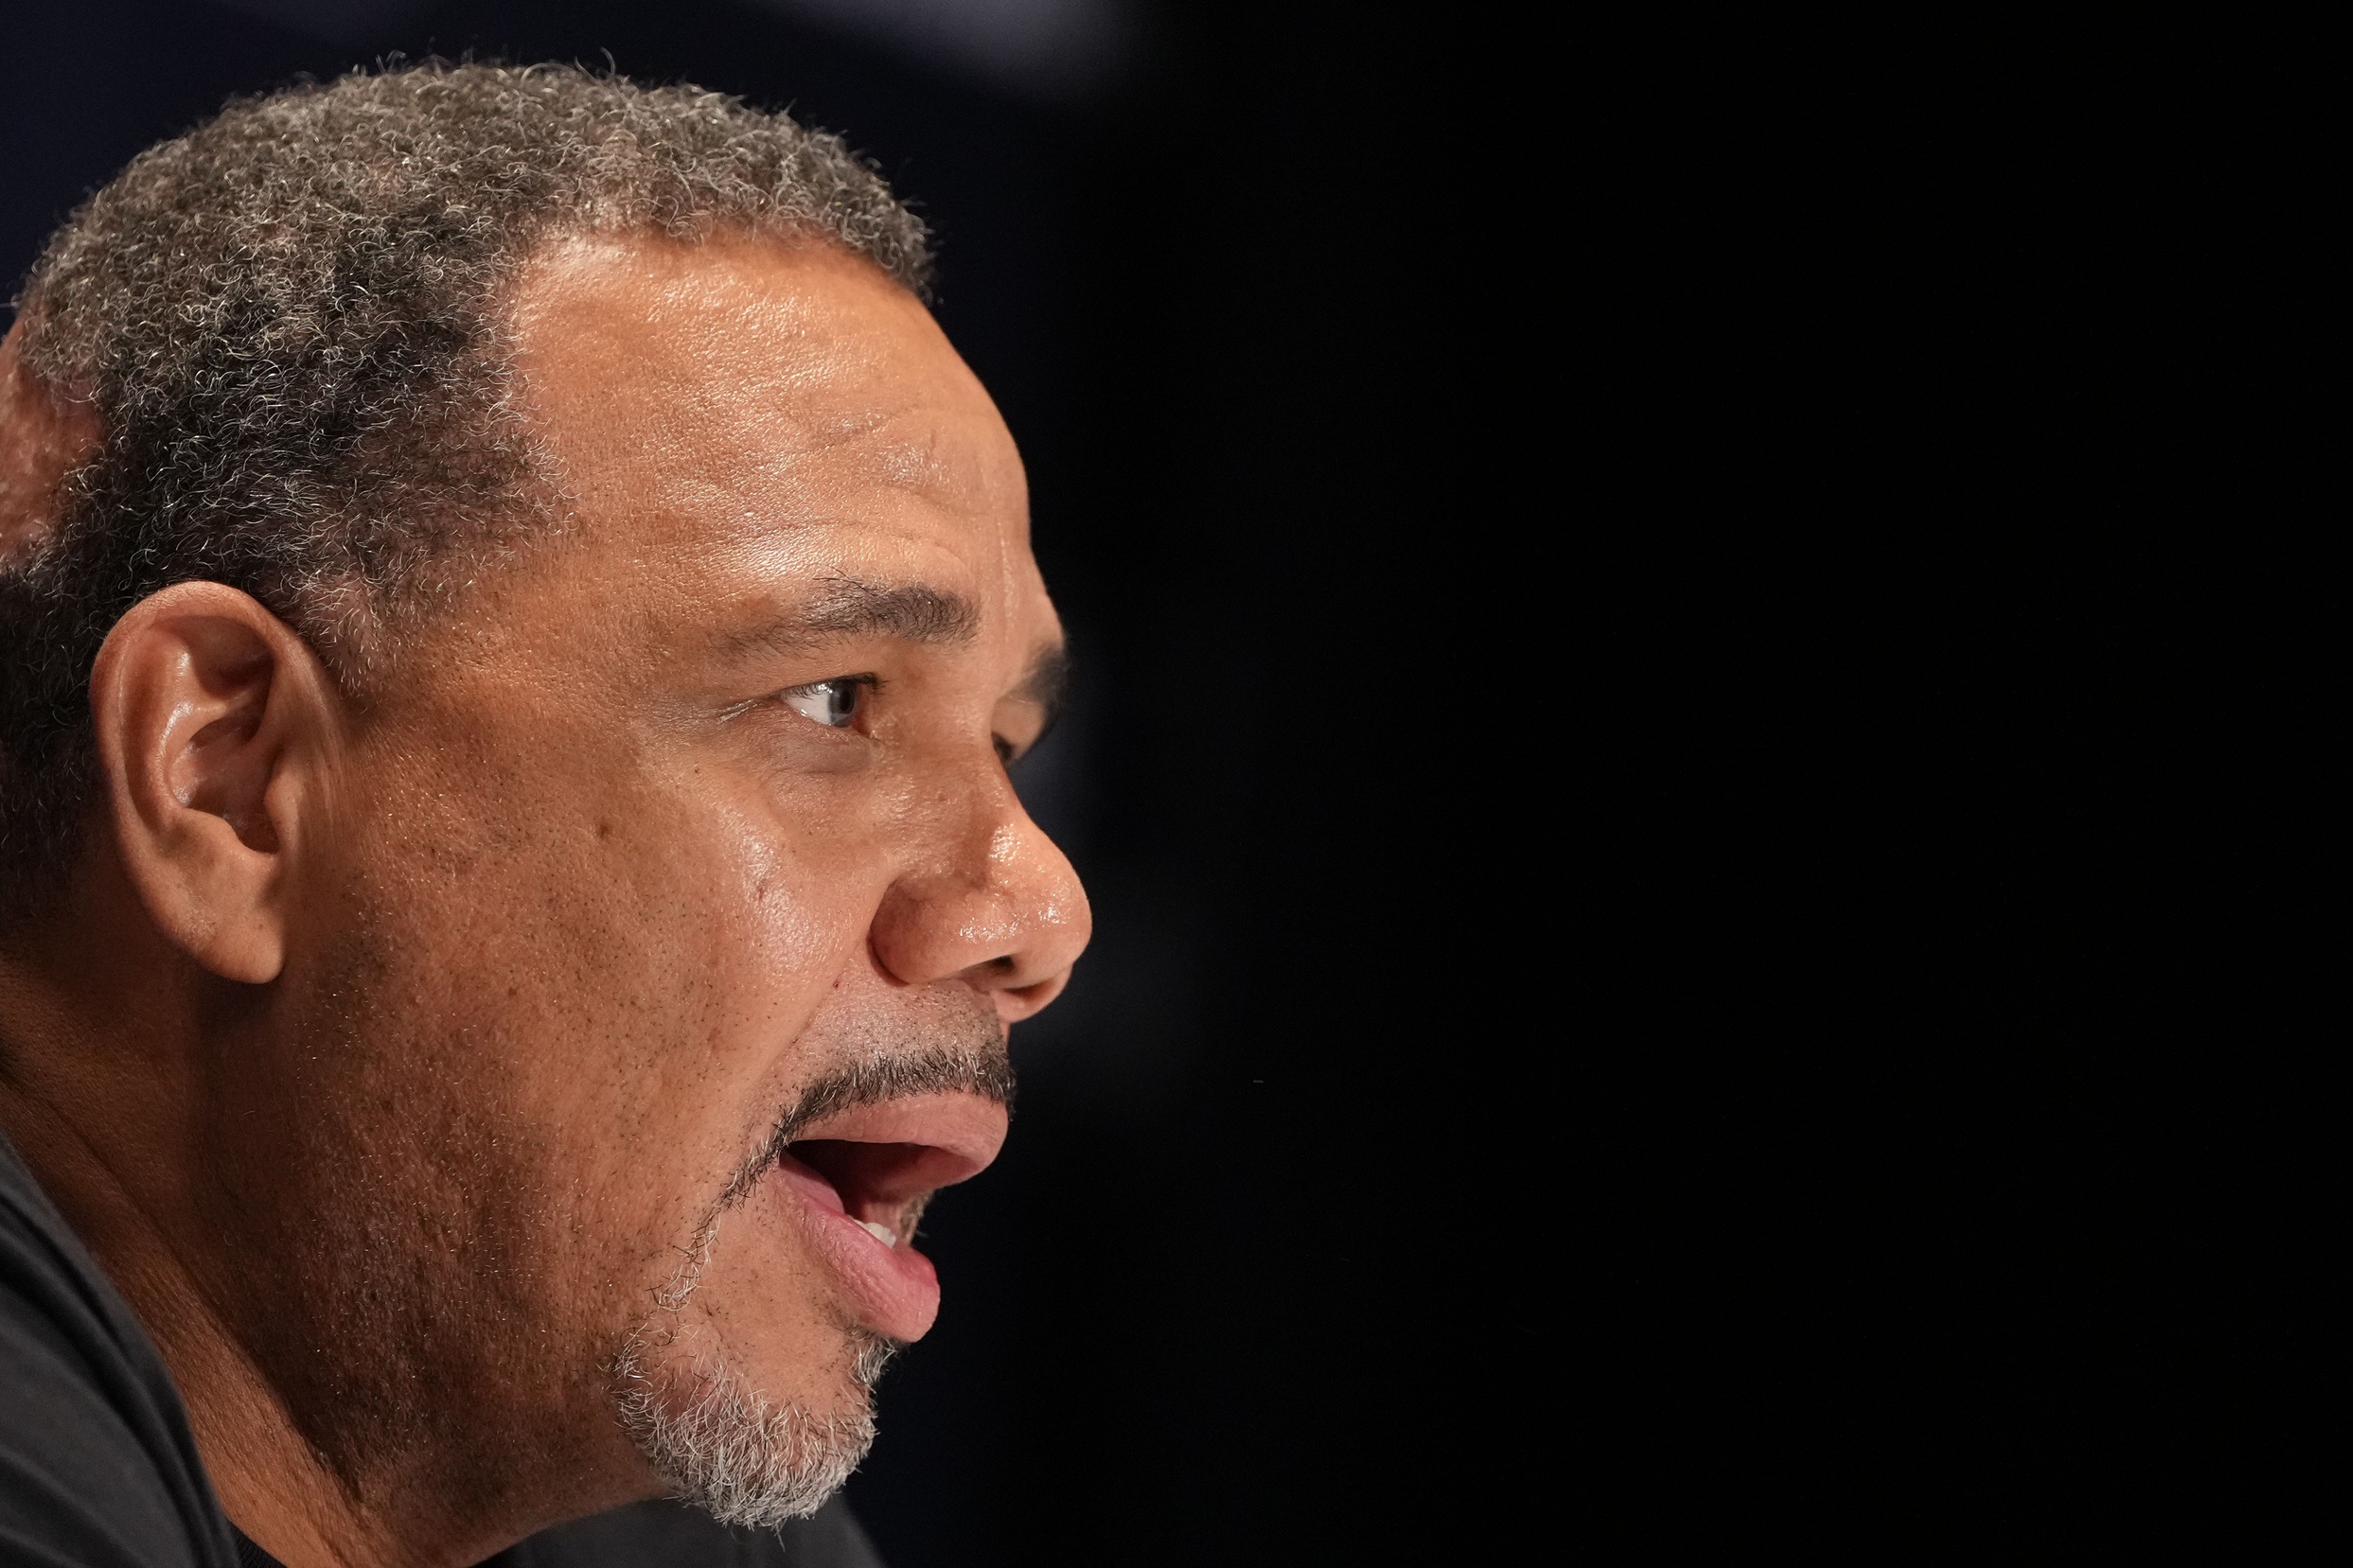 Mar 16, 2023; Greensboro, NC, USA; Former Providence Friars head coach and current Georgetown Hoyas Head Coach Ed Cooley during a press conference at Greensboro Coliseum last March. Mandatory Credit: Bob Donnan-USA TODAY Sports